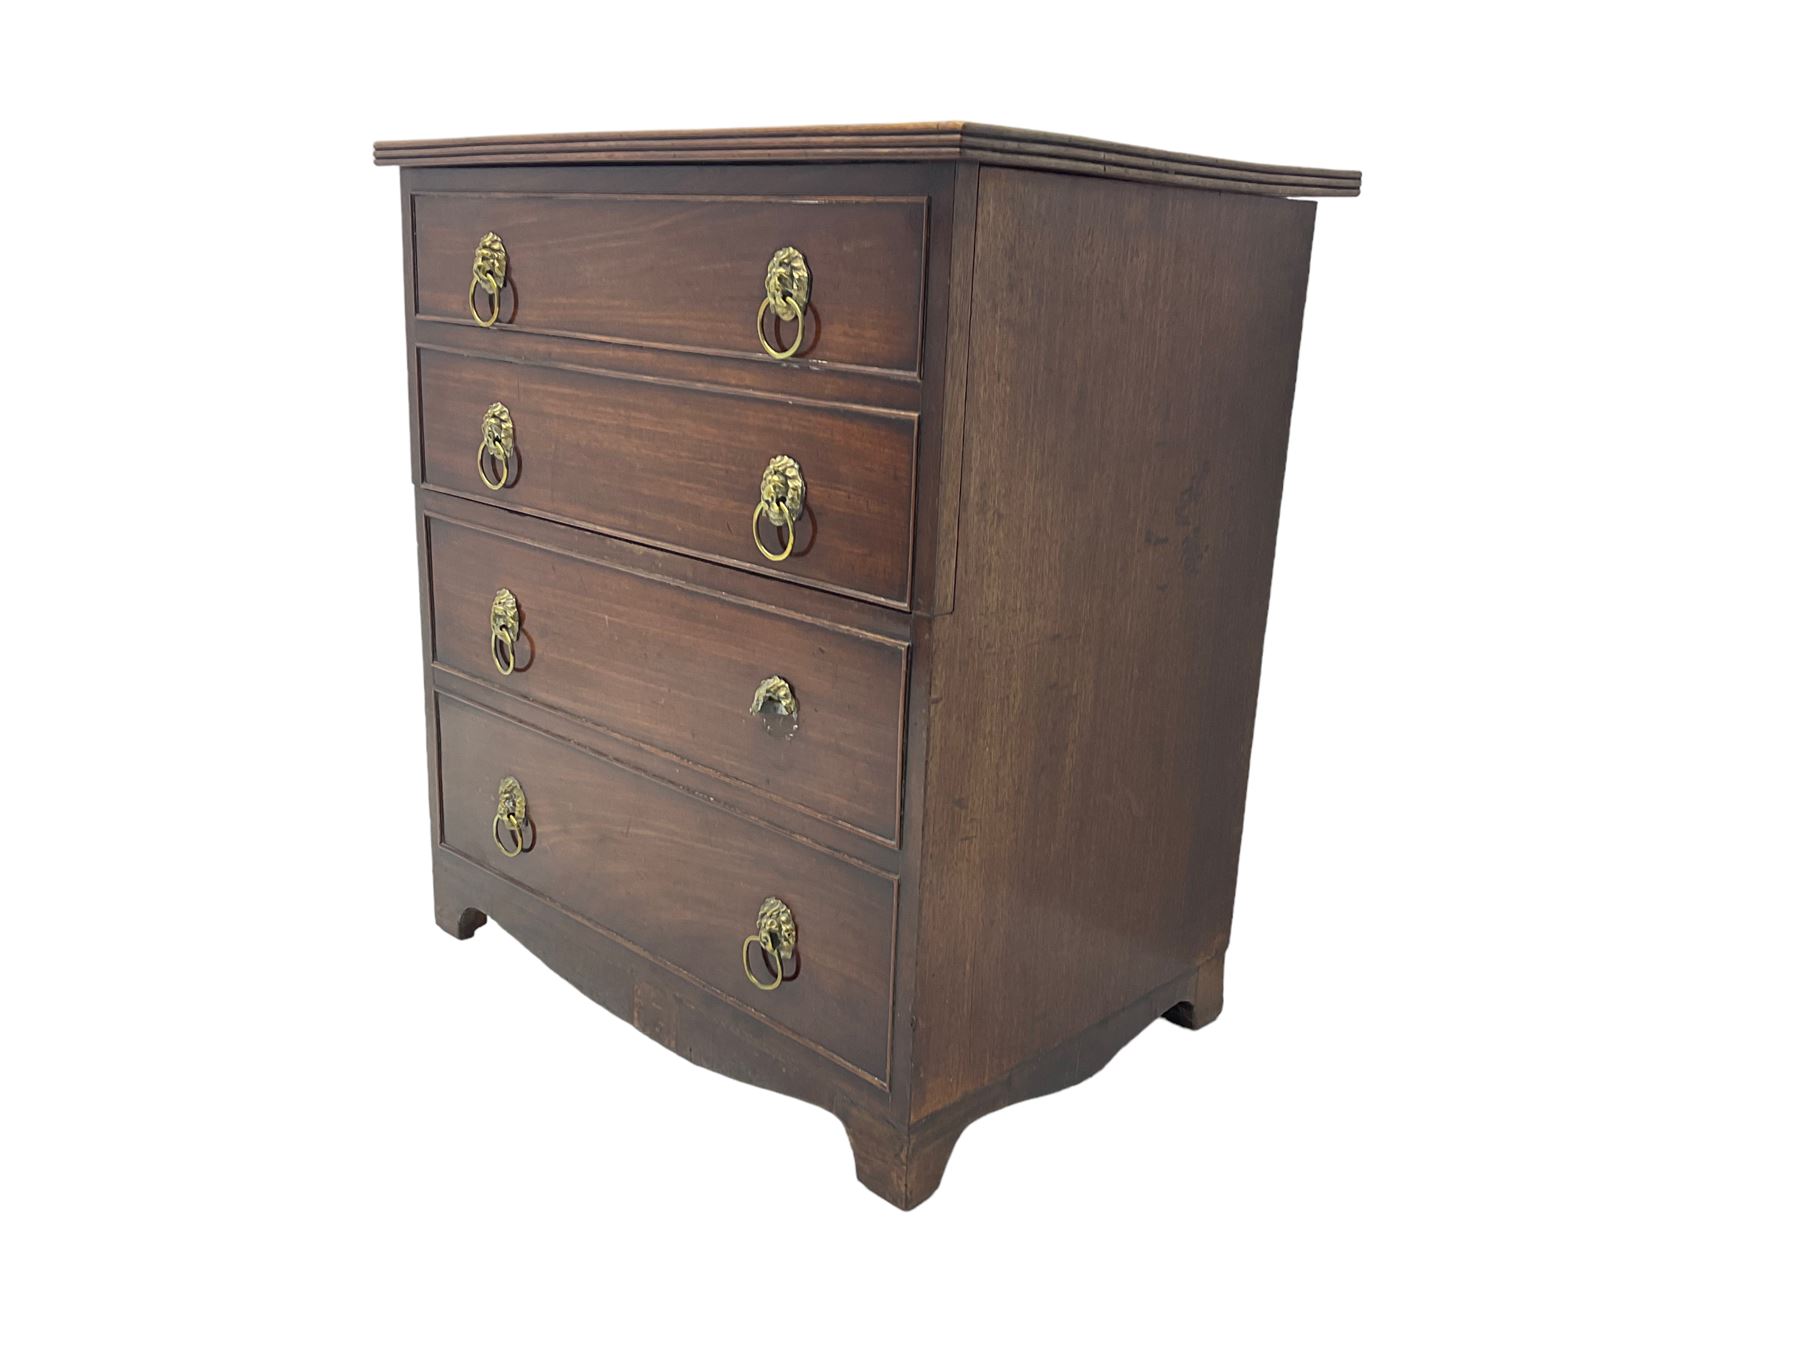 Early 19th century mahogany commode chest - Image 3 of 7